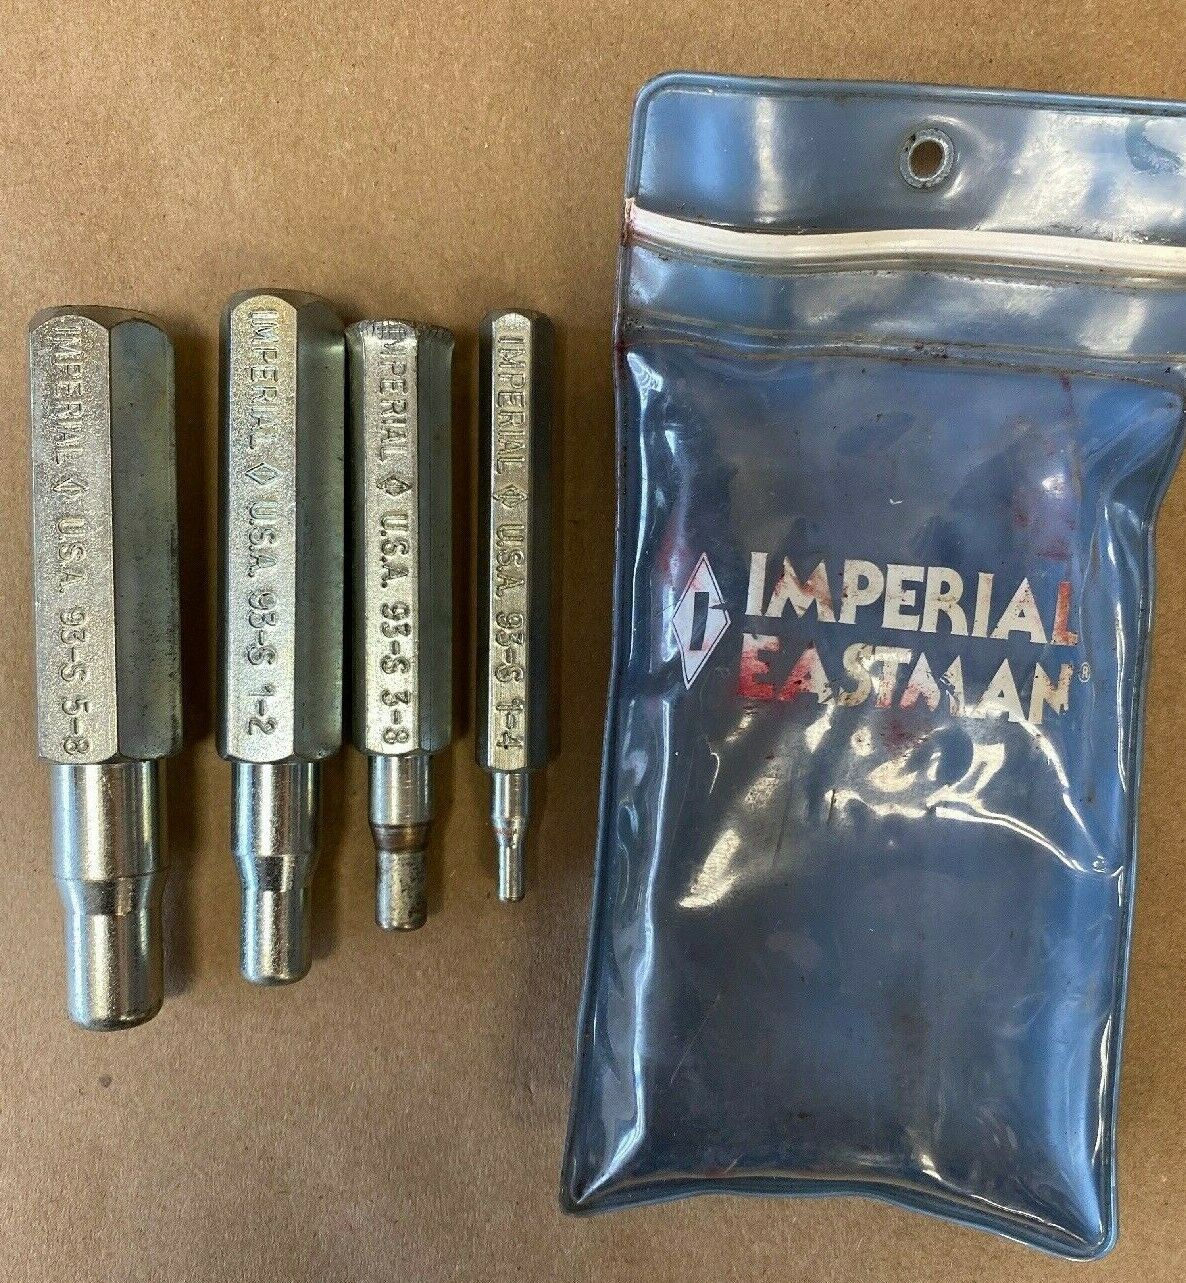 Imperial Eastman Punch Type Swaging Tool Model No. 93-s 5/8'', 1/2", 3/8", 1/4"